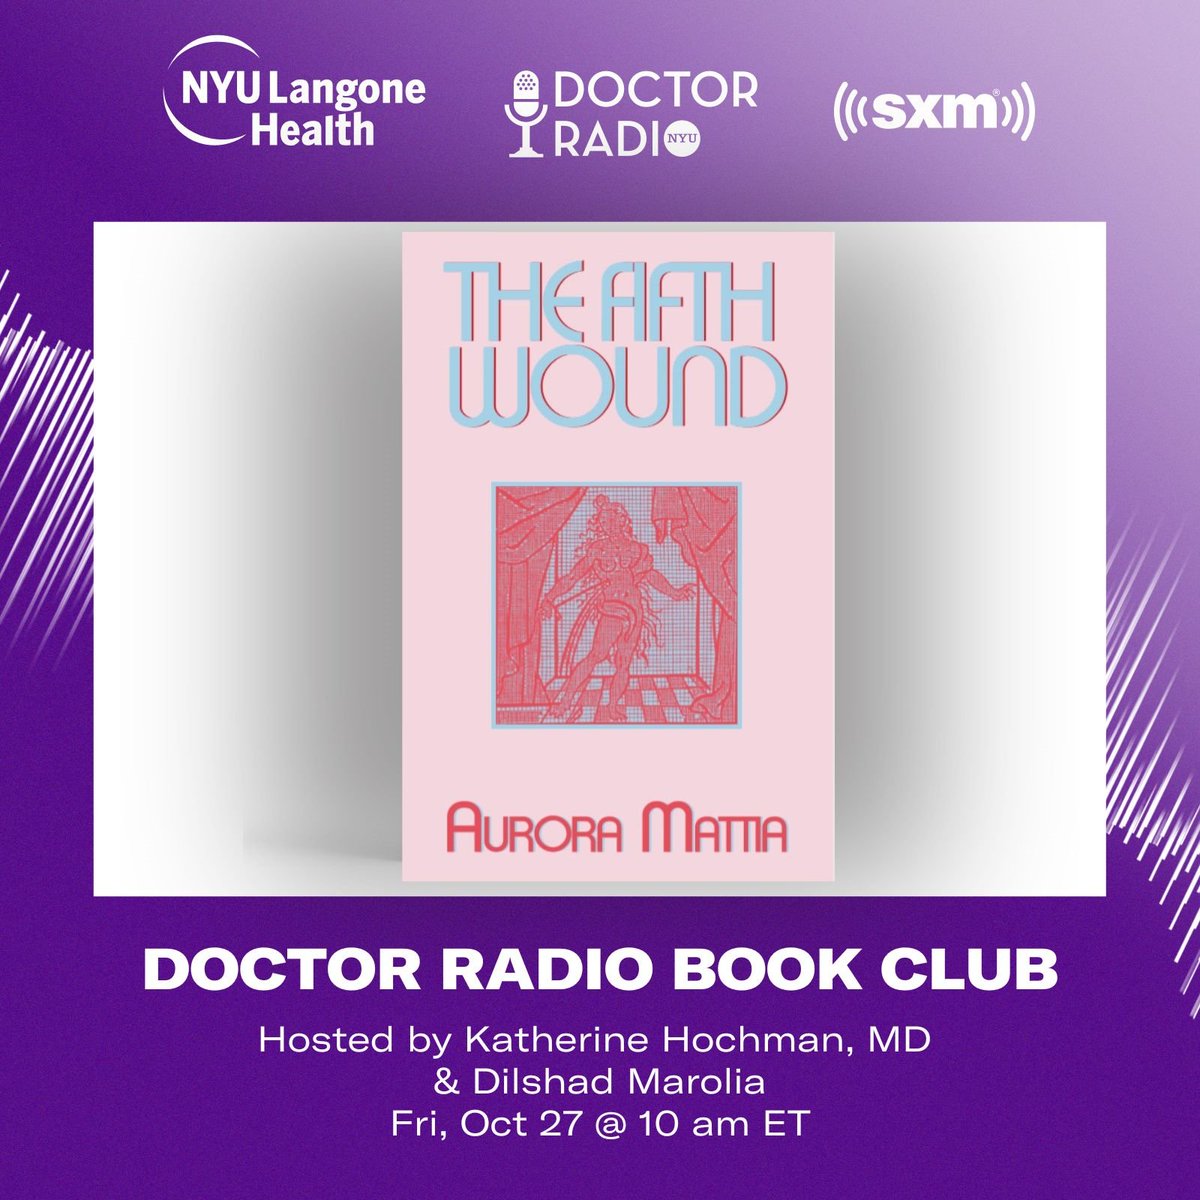 Book Club is LIVE at 10 AM ET on Friday. @KHochmanMD & @dilshadmarolia talk with Aurora Mattia about her book 'The Fifth Wound'@nightboatbooks Tune in!